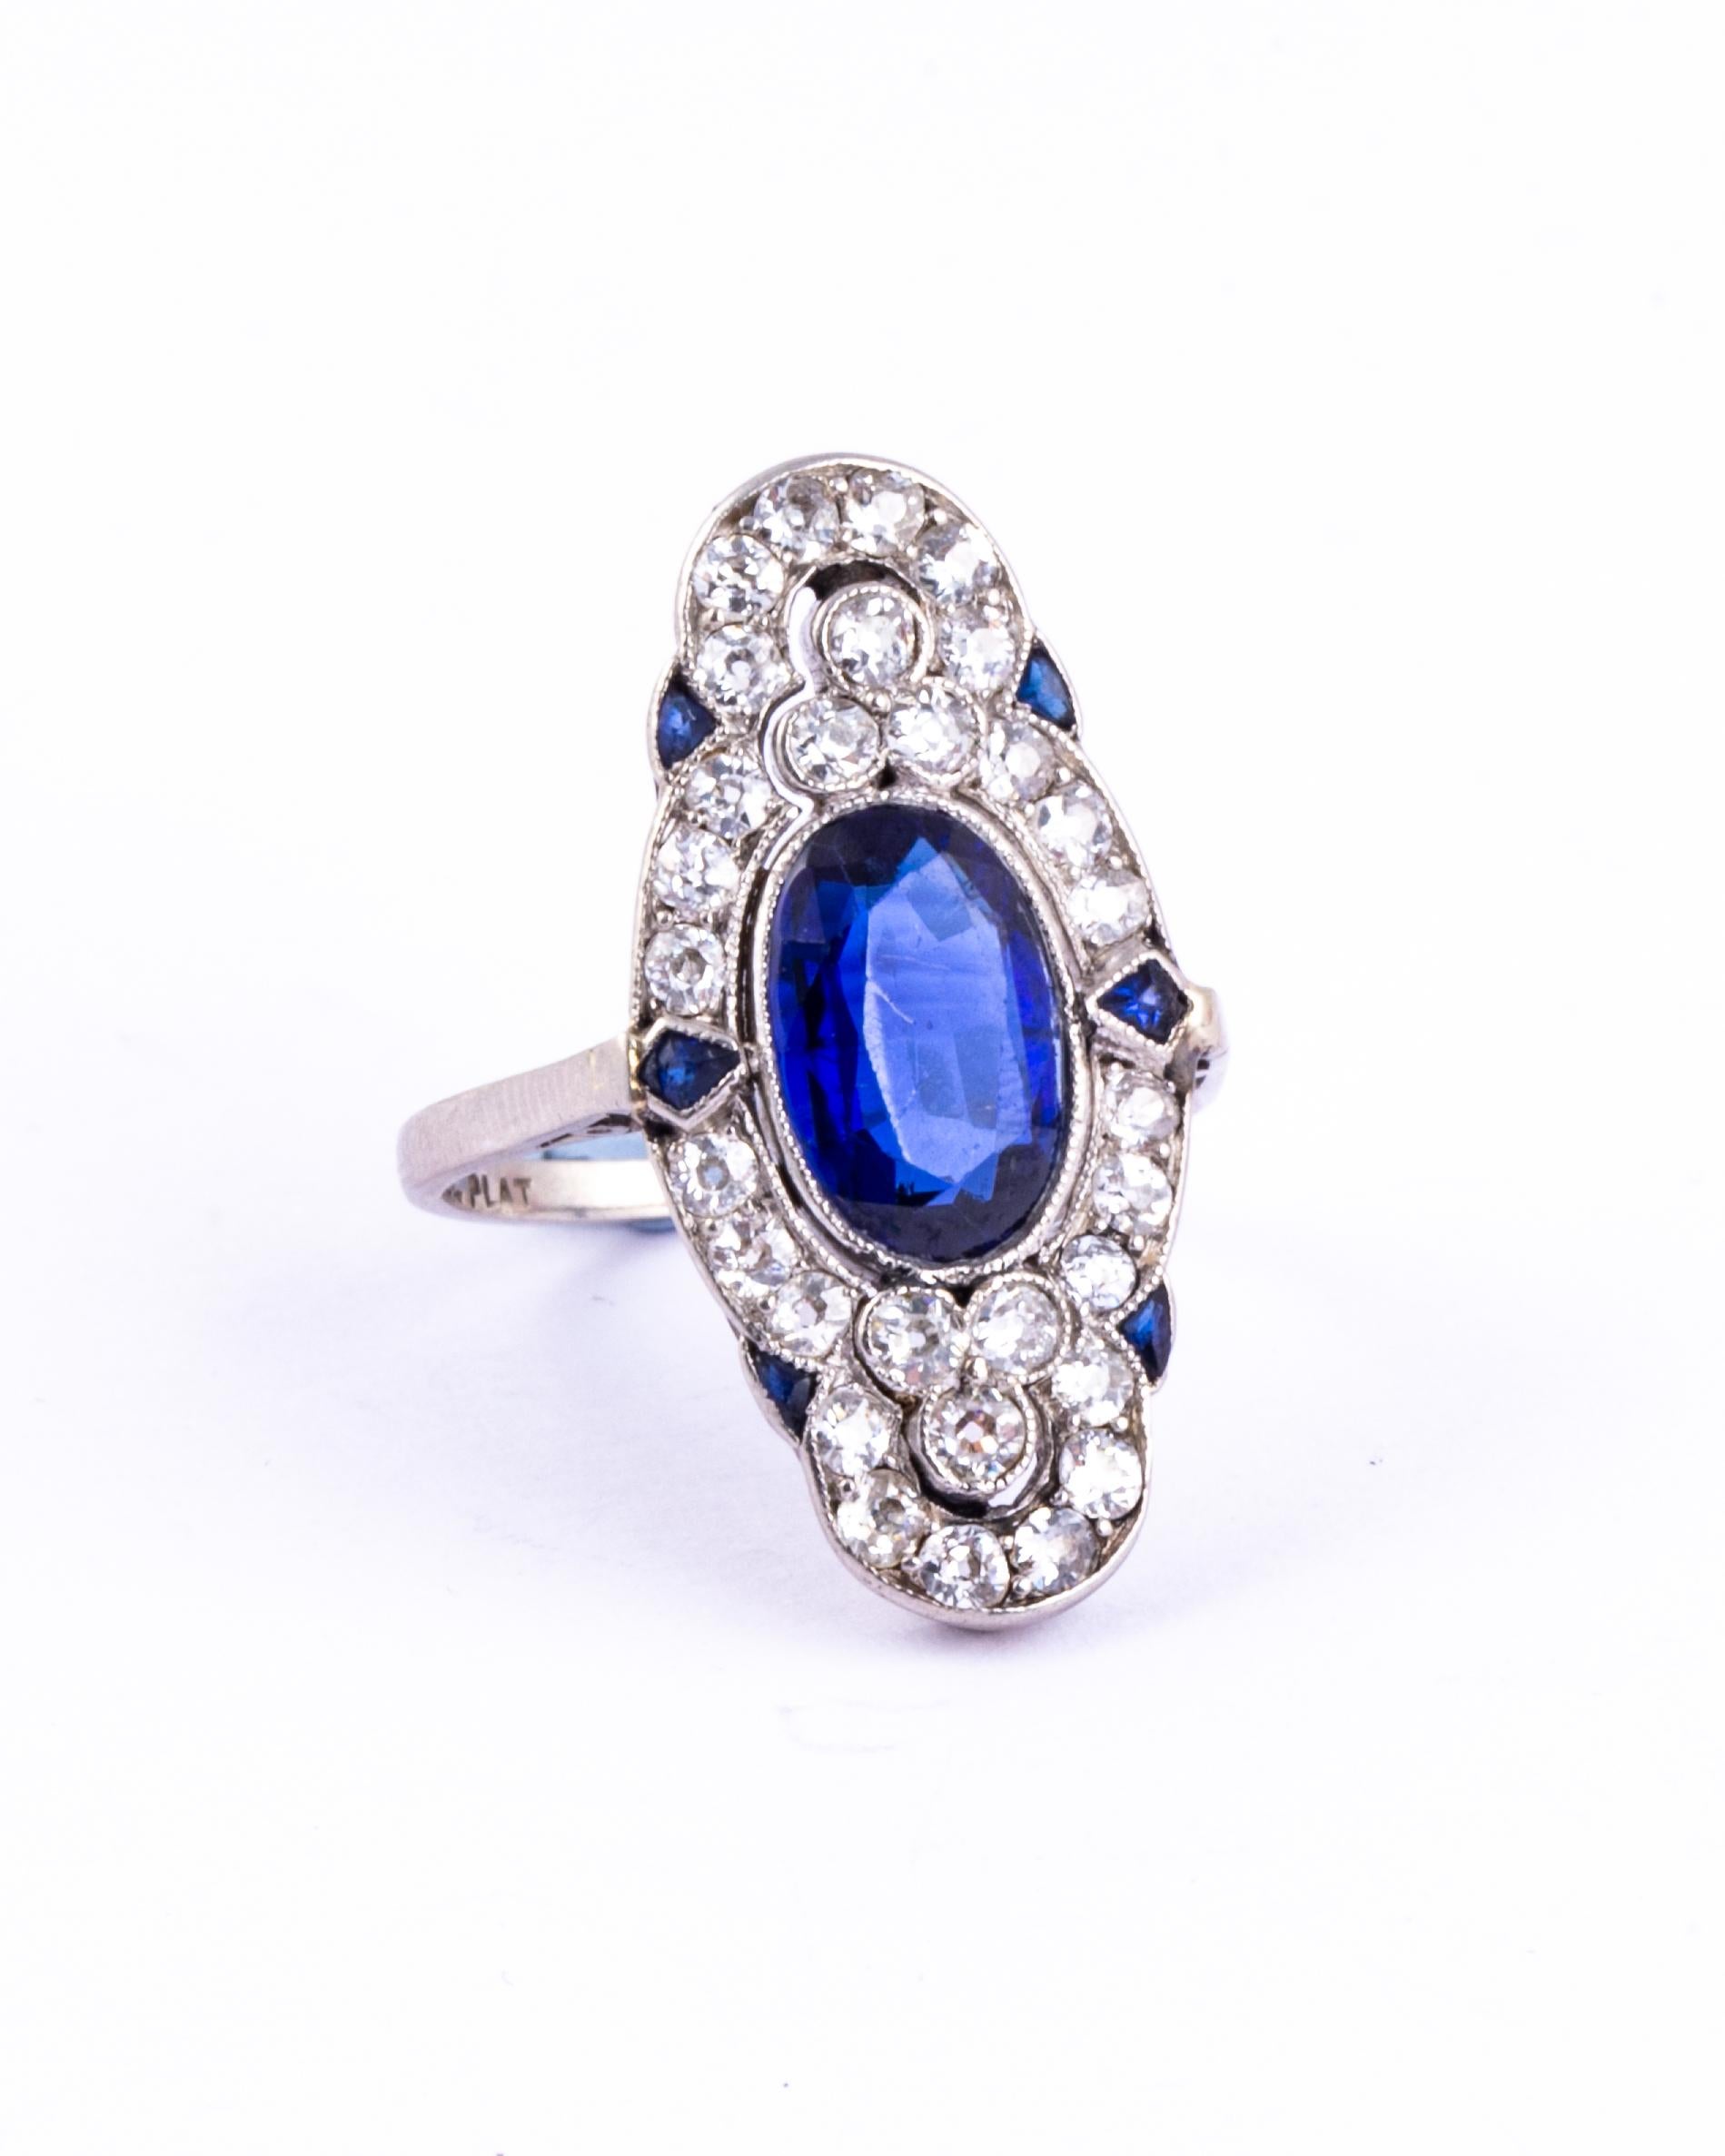 This classic Art Deco panel ring is a stunning piece. At the centre is a sapphire measuring approx 2ct and surrounding it on a decorative frame are size smaller sapphires and sparkling diamonds. The trefoil of old mine cut diamonds sit all around